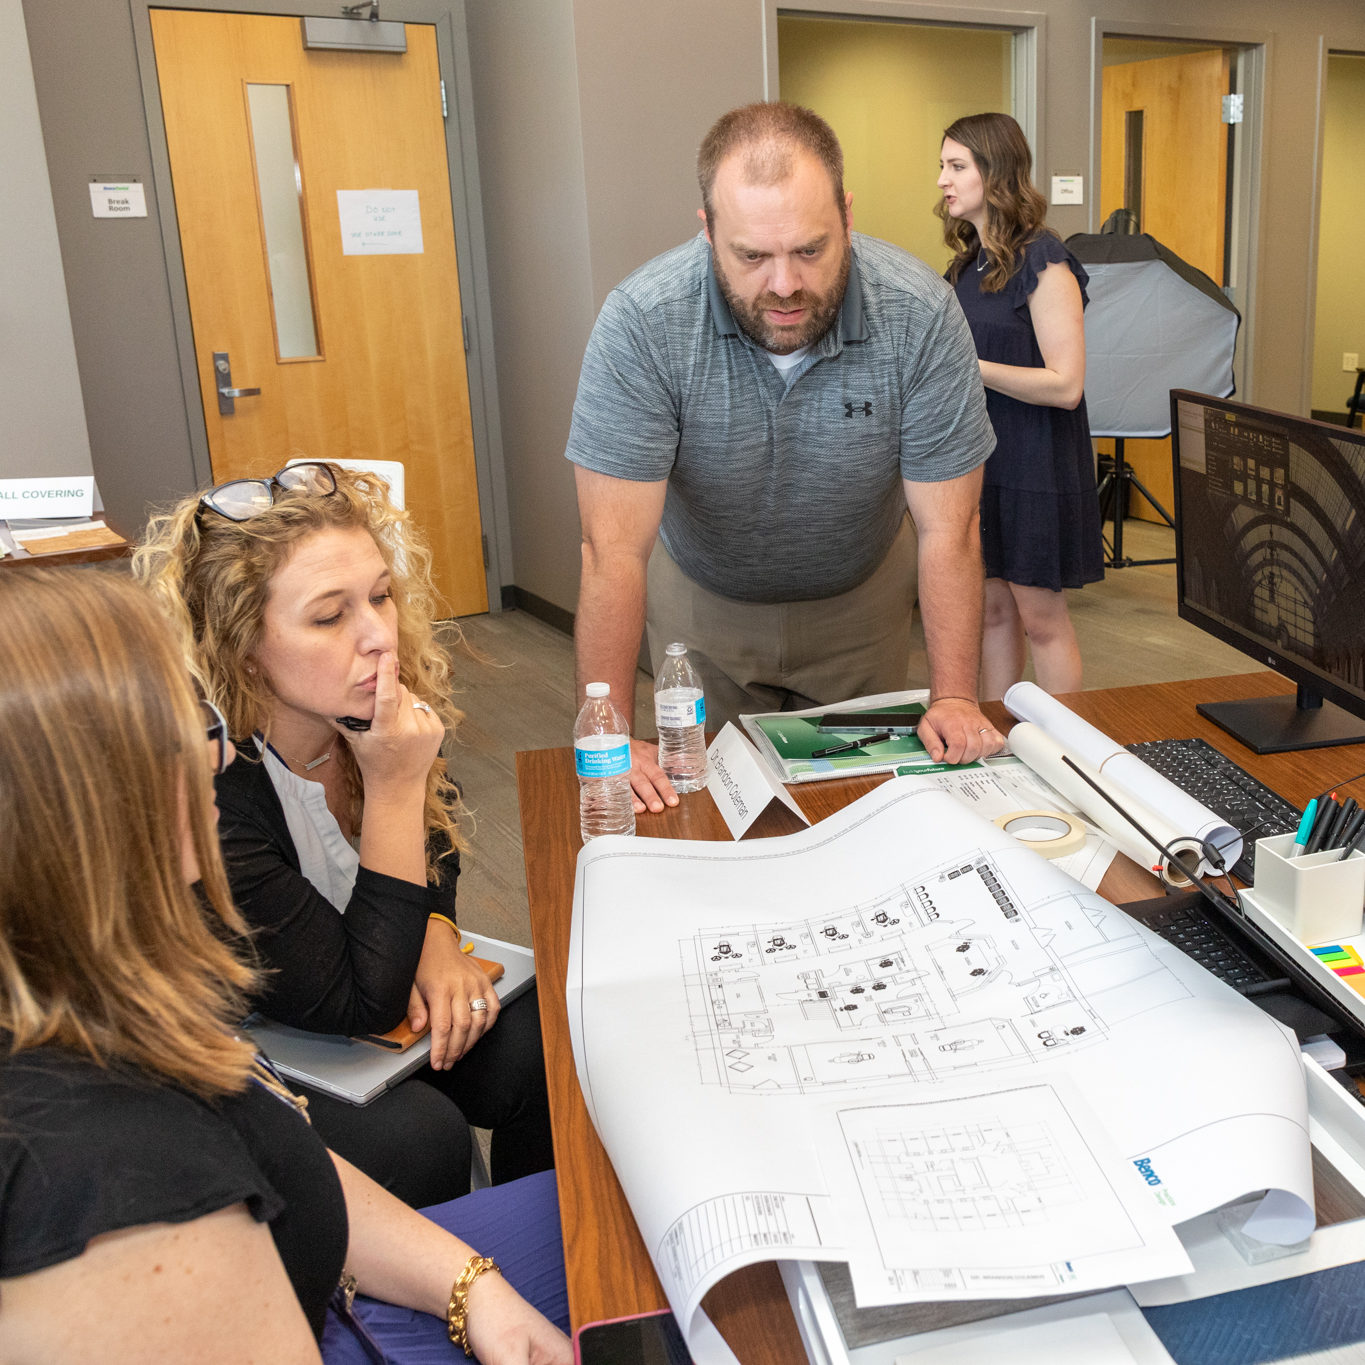 With its highly specialized use of space, dentistry calls for many considerations ahead of selecting interior finishes. At Benco Dental's Build Your Future dental practice design workshops, work side-by-side with dental design experts and leave with tangible plans.